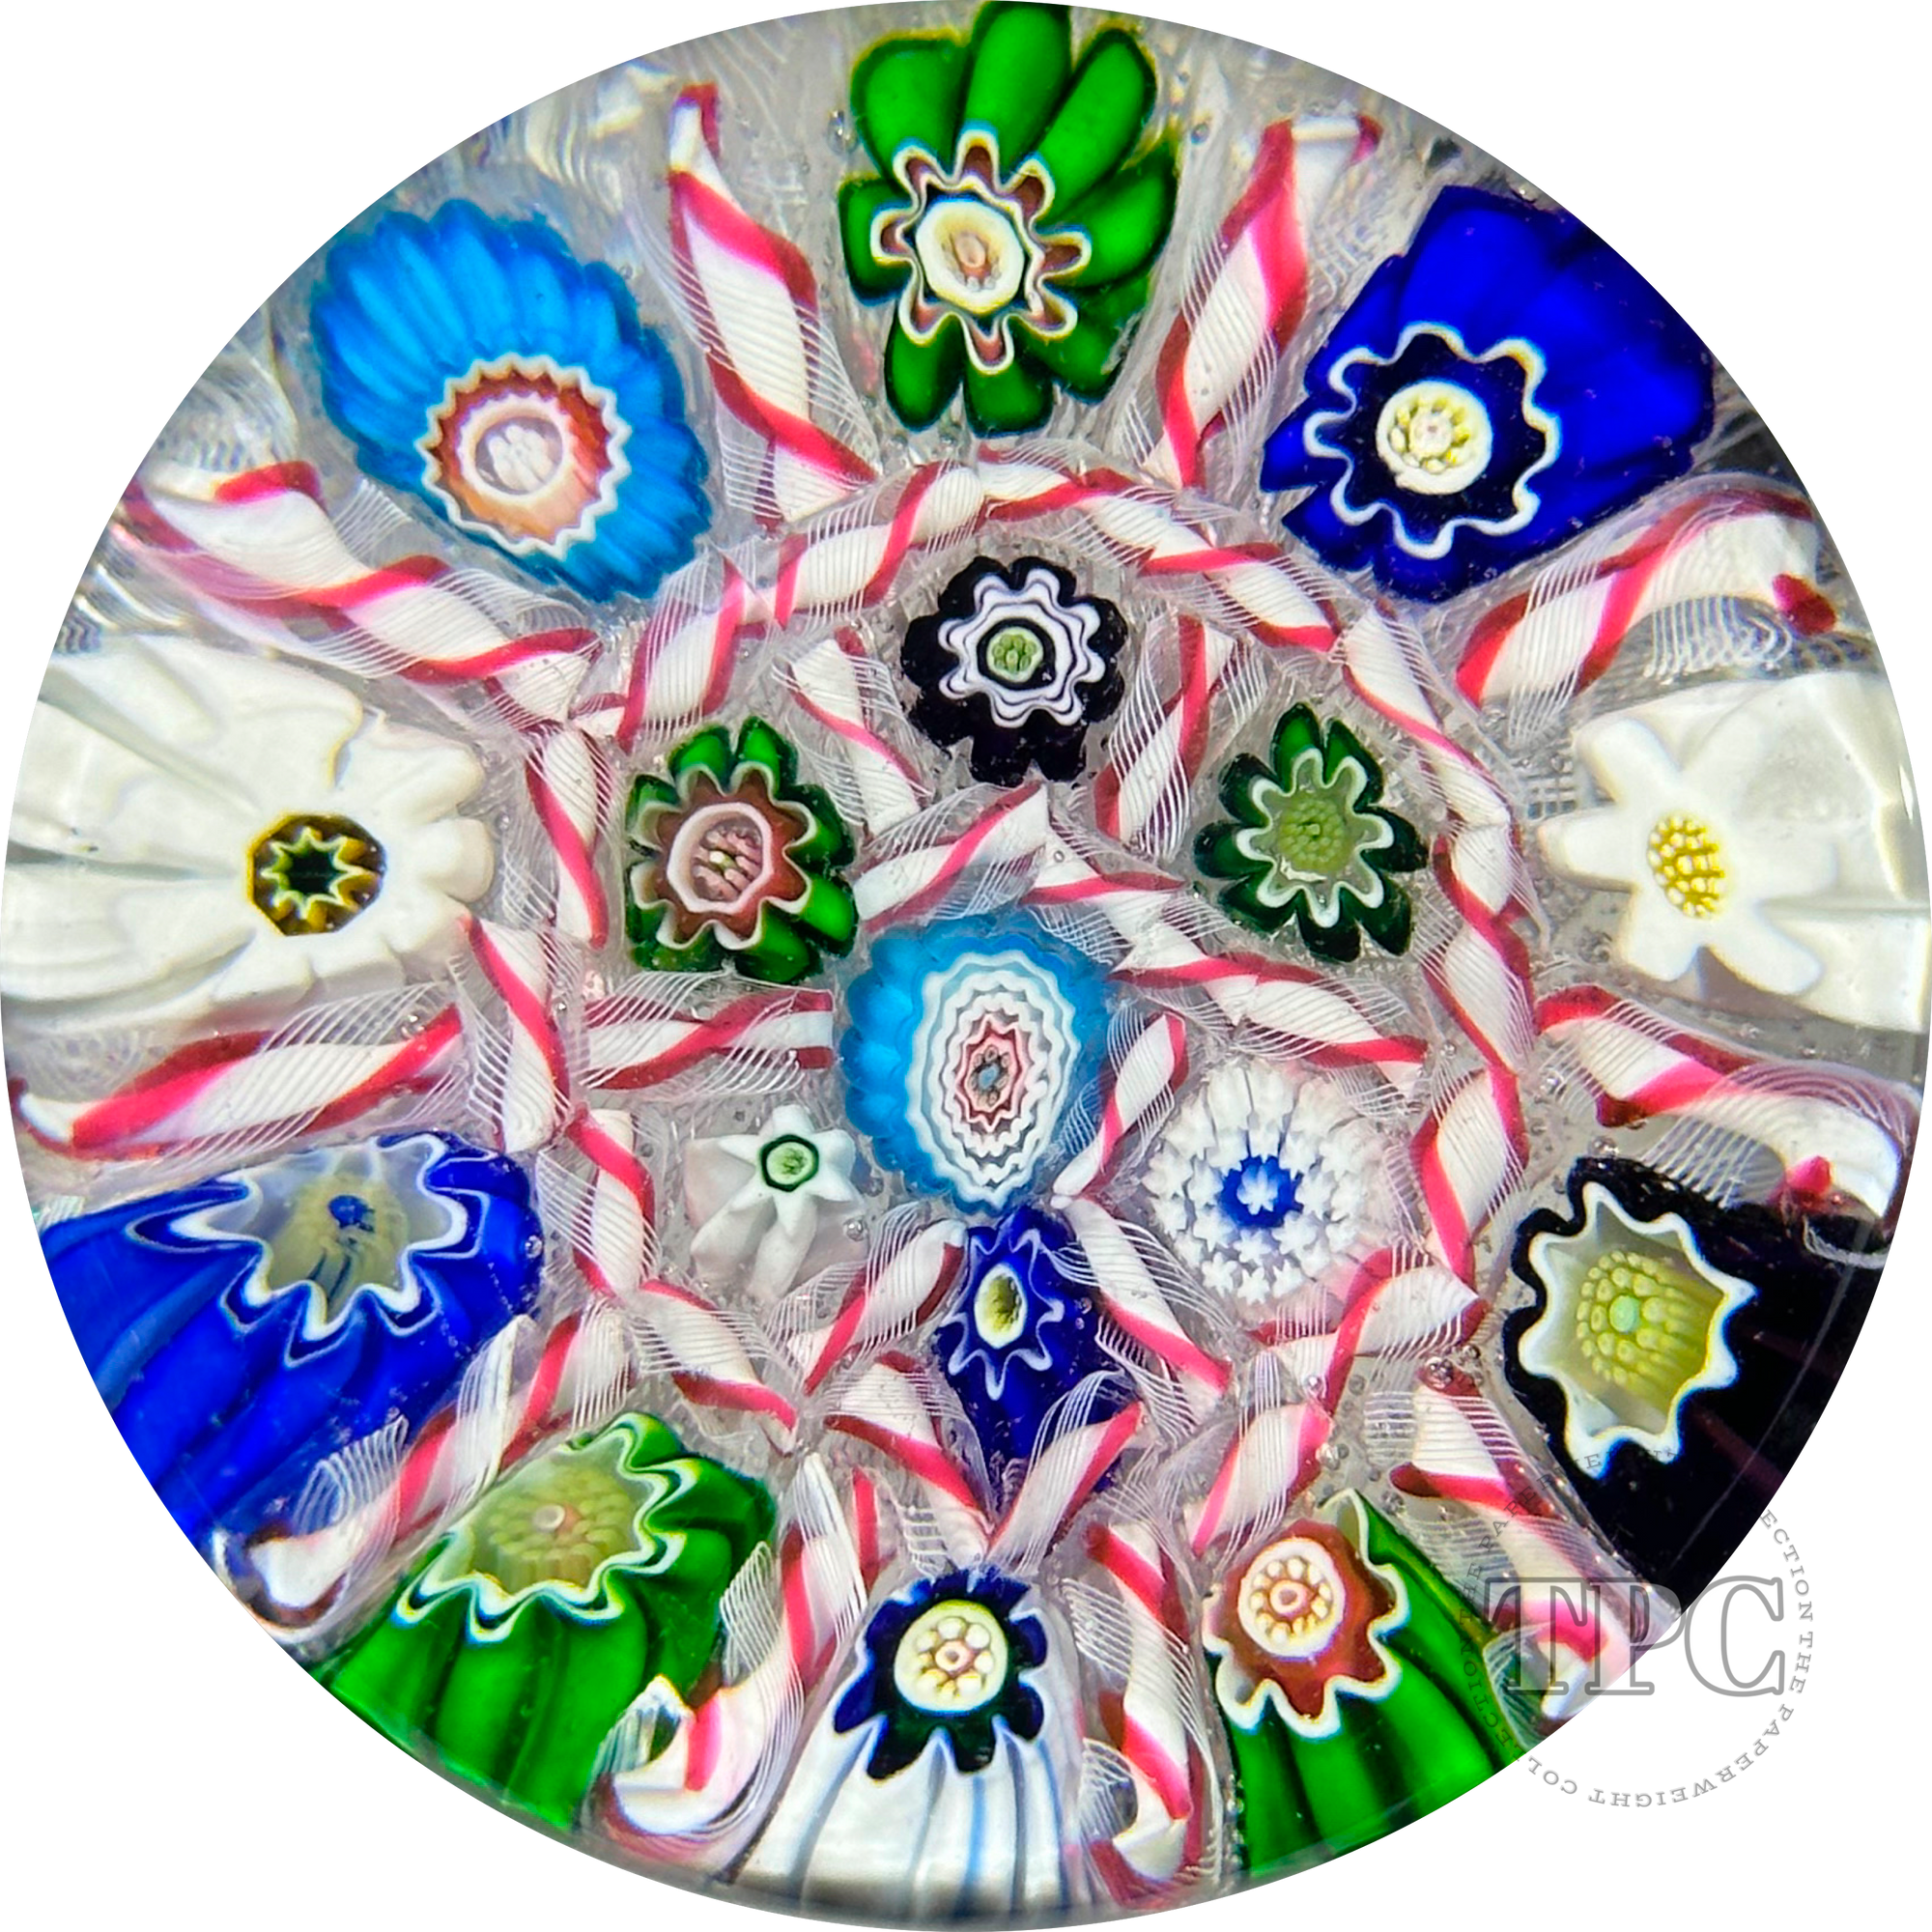 Uncommon Antique Clichy Glass Art Paperweight Millefiori Chequer With Red & White Barber Pole Twists